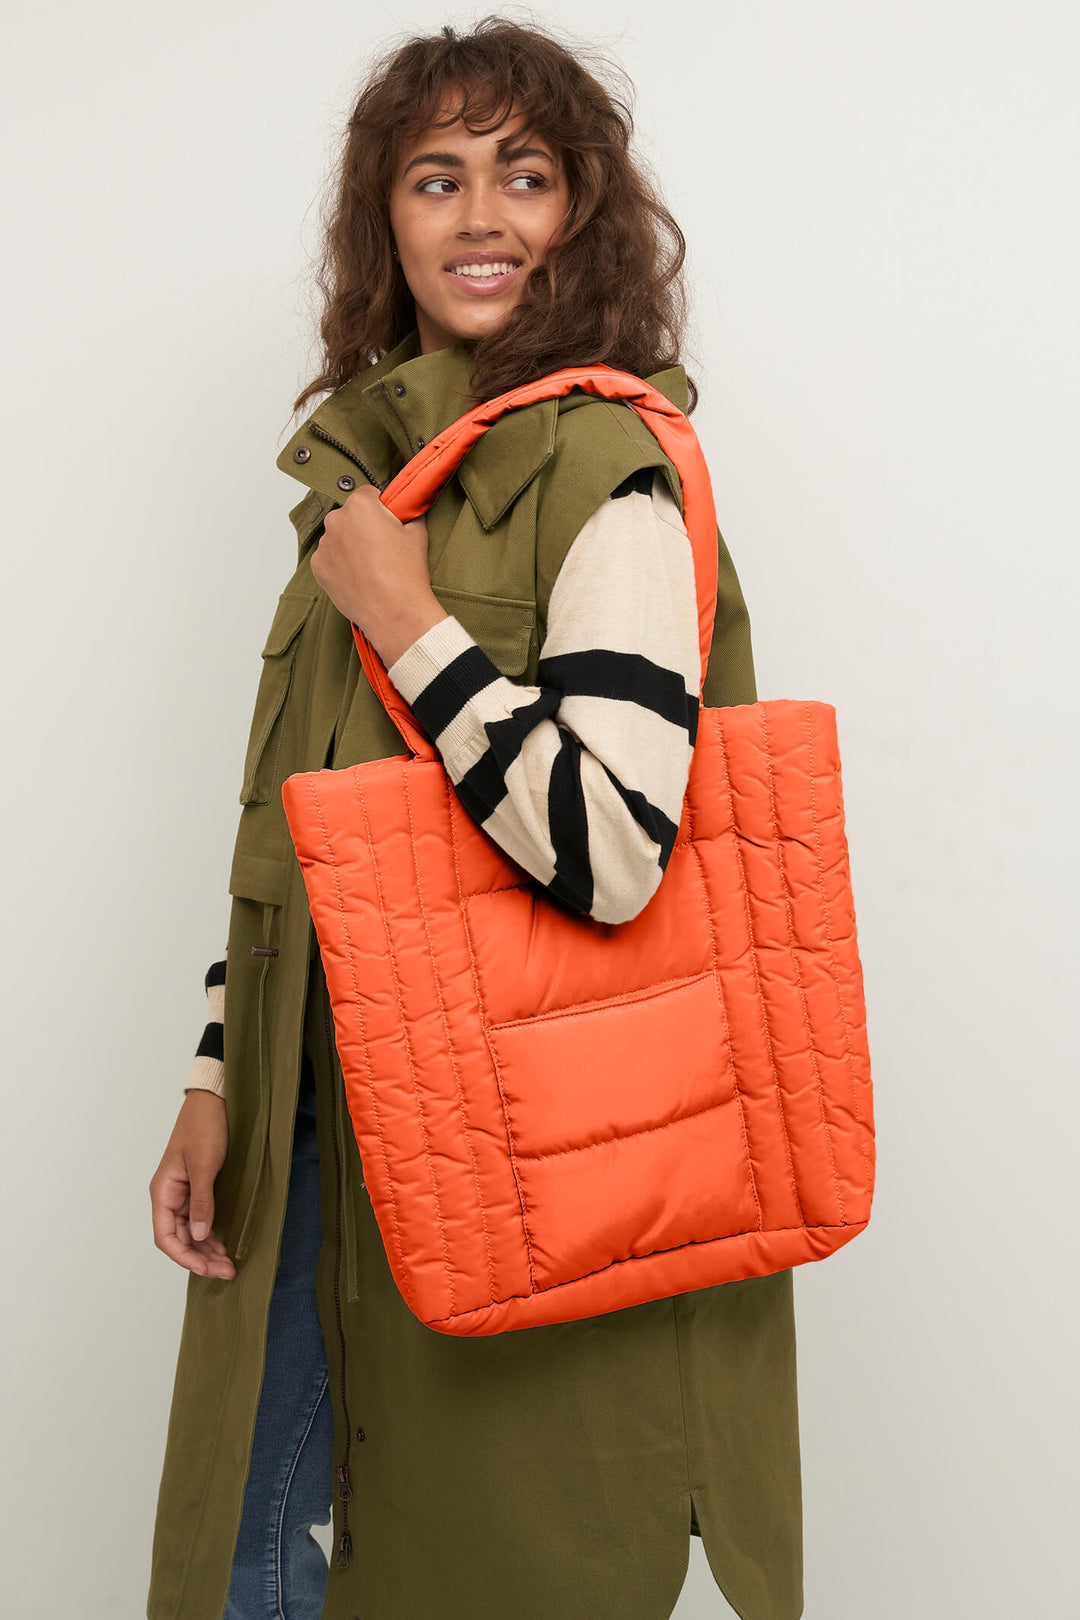 Cream Clothing CRSleigh Tigerlily Orange Quilted Bag - Experience Boutique